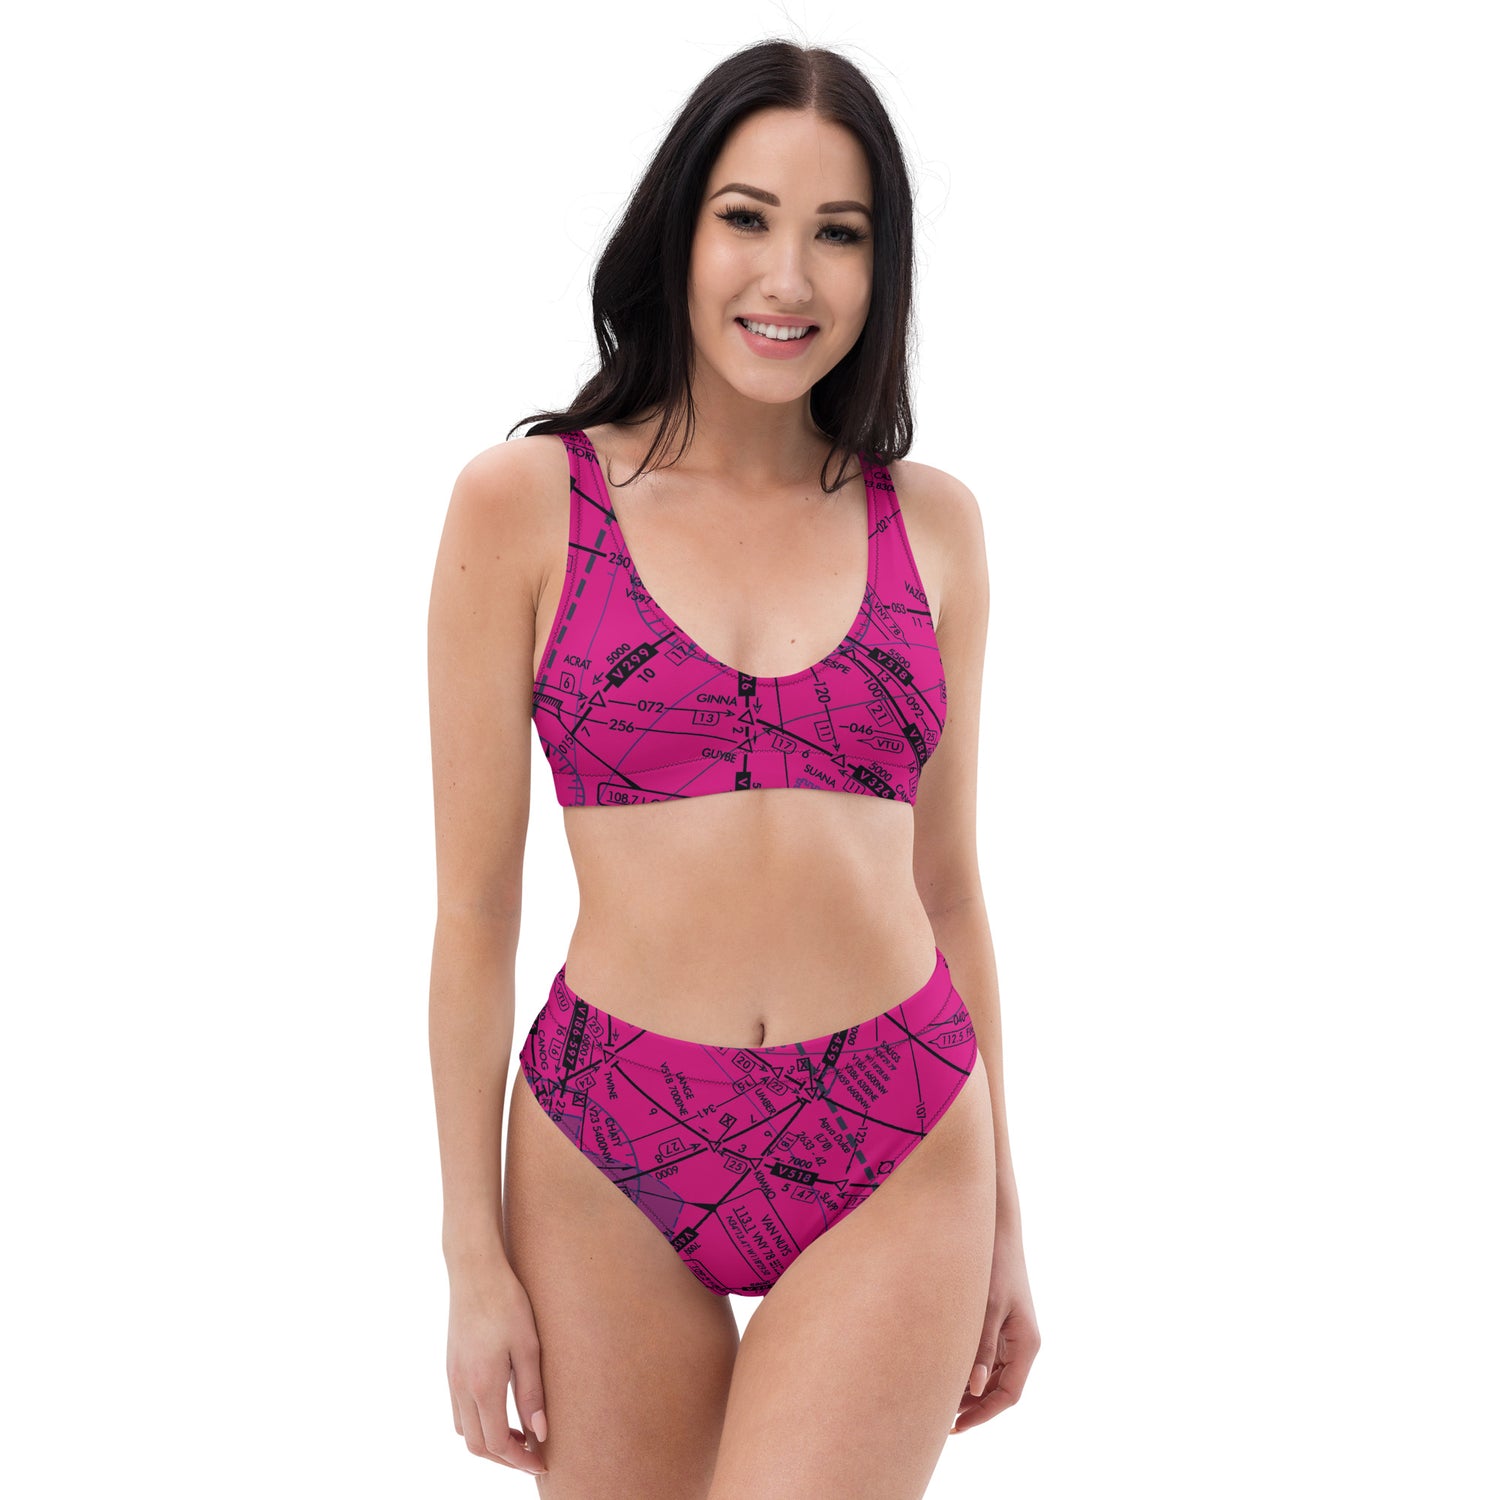 Enroute Low Altitude Chart recycled high-waisted bikini (pink)